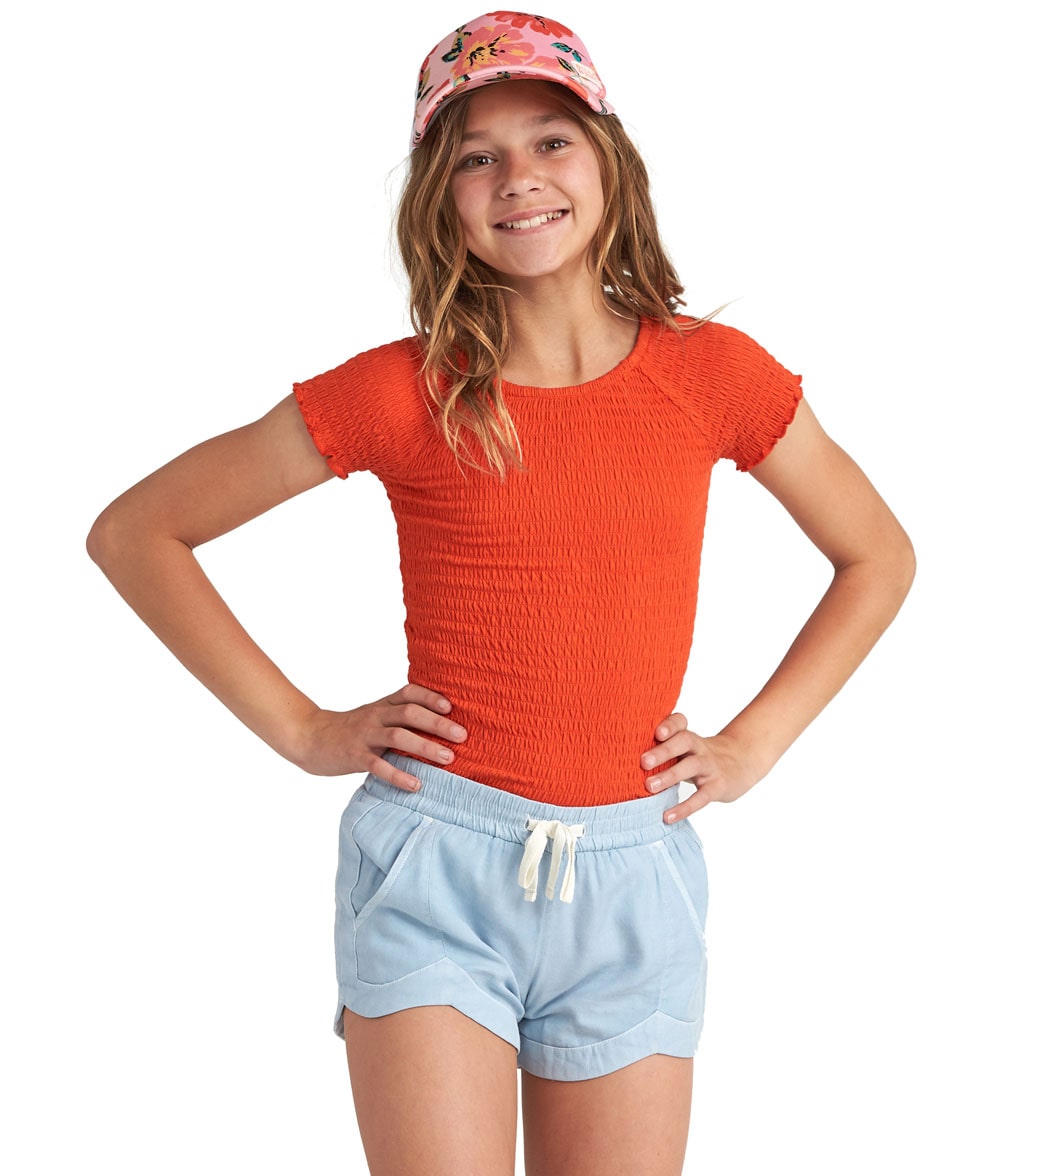 Billabong Girls' Mad For You Woven Shorts - Chambray X-Small 5/6 Cotton - Swimoutlet.com